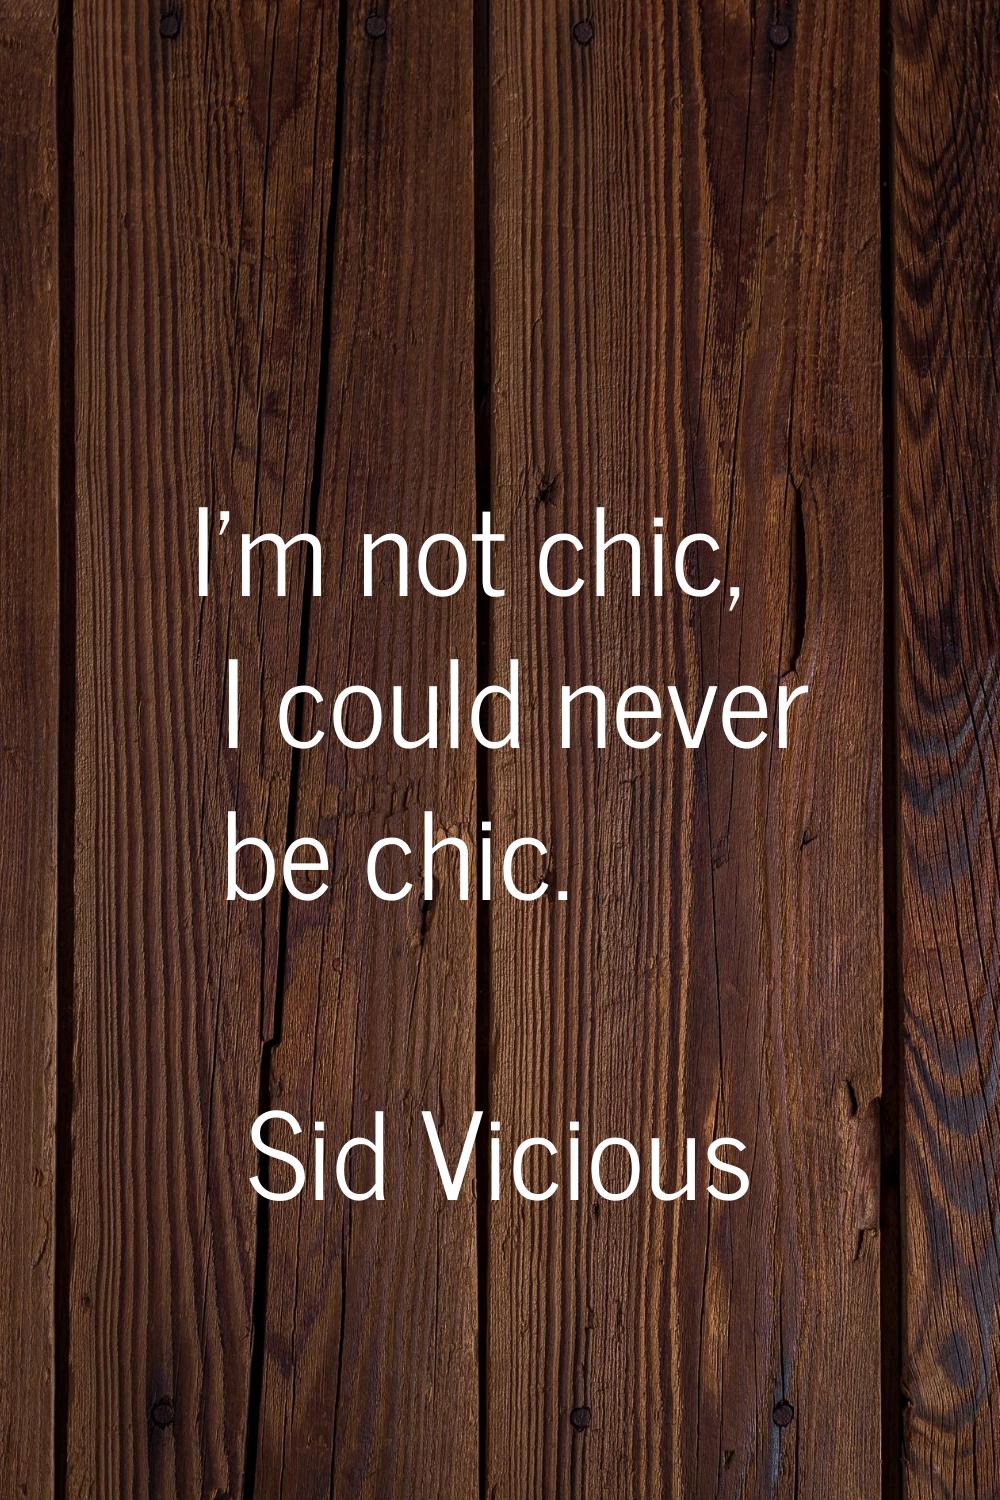 I'm not chic, I could never be chic.